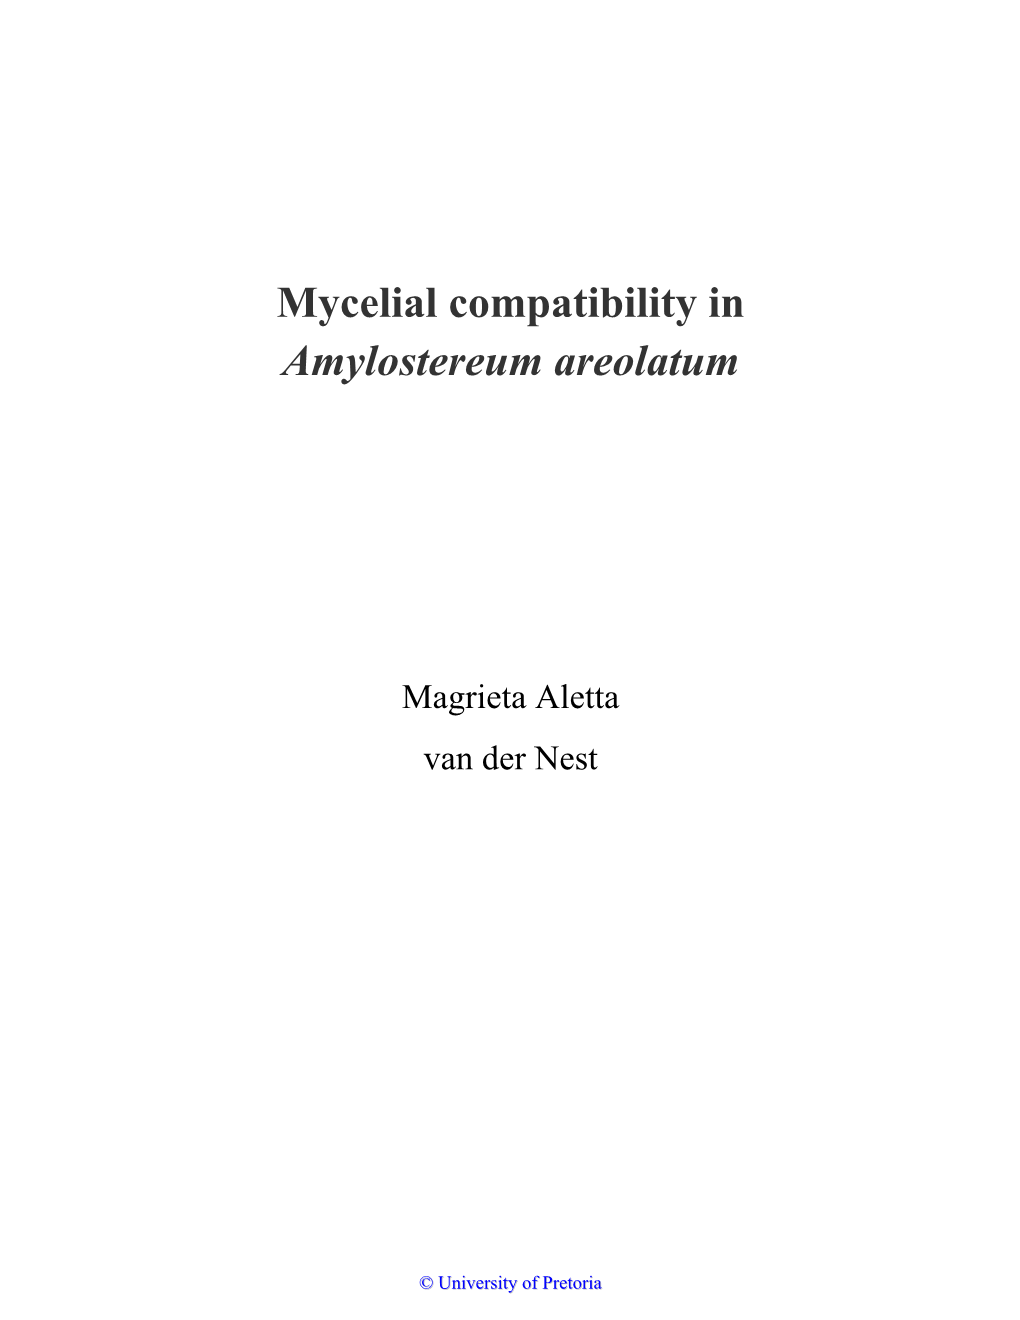 Mycelial Compatibility in Amylostereum Areolatum